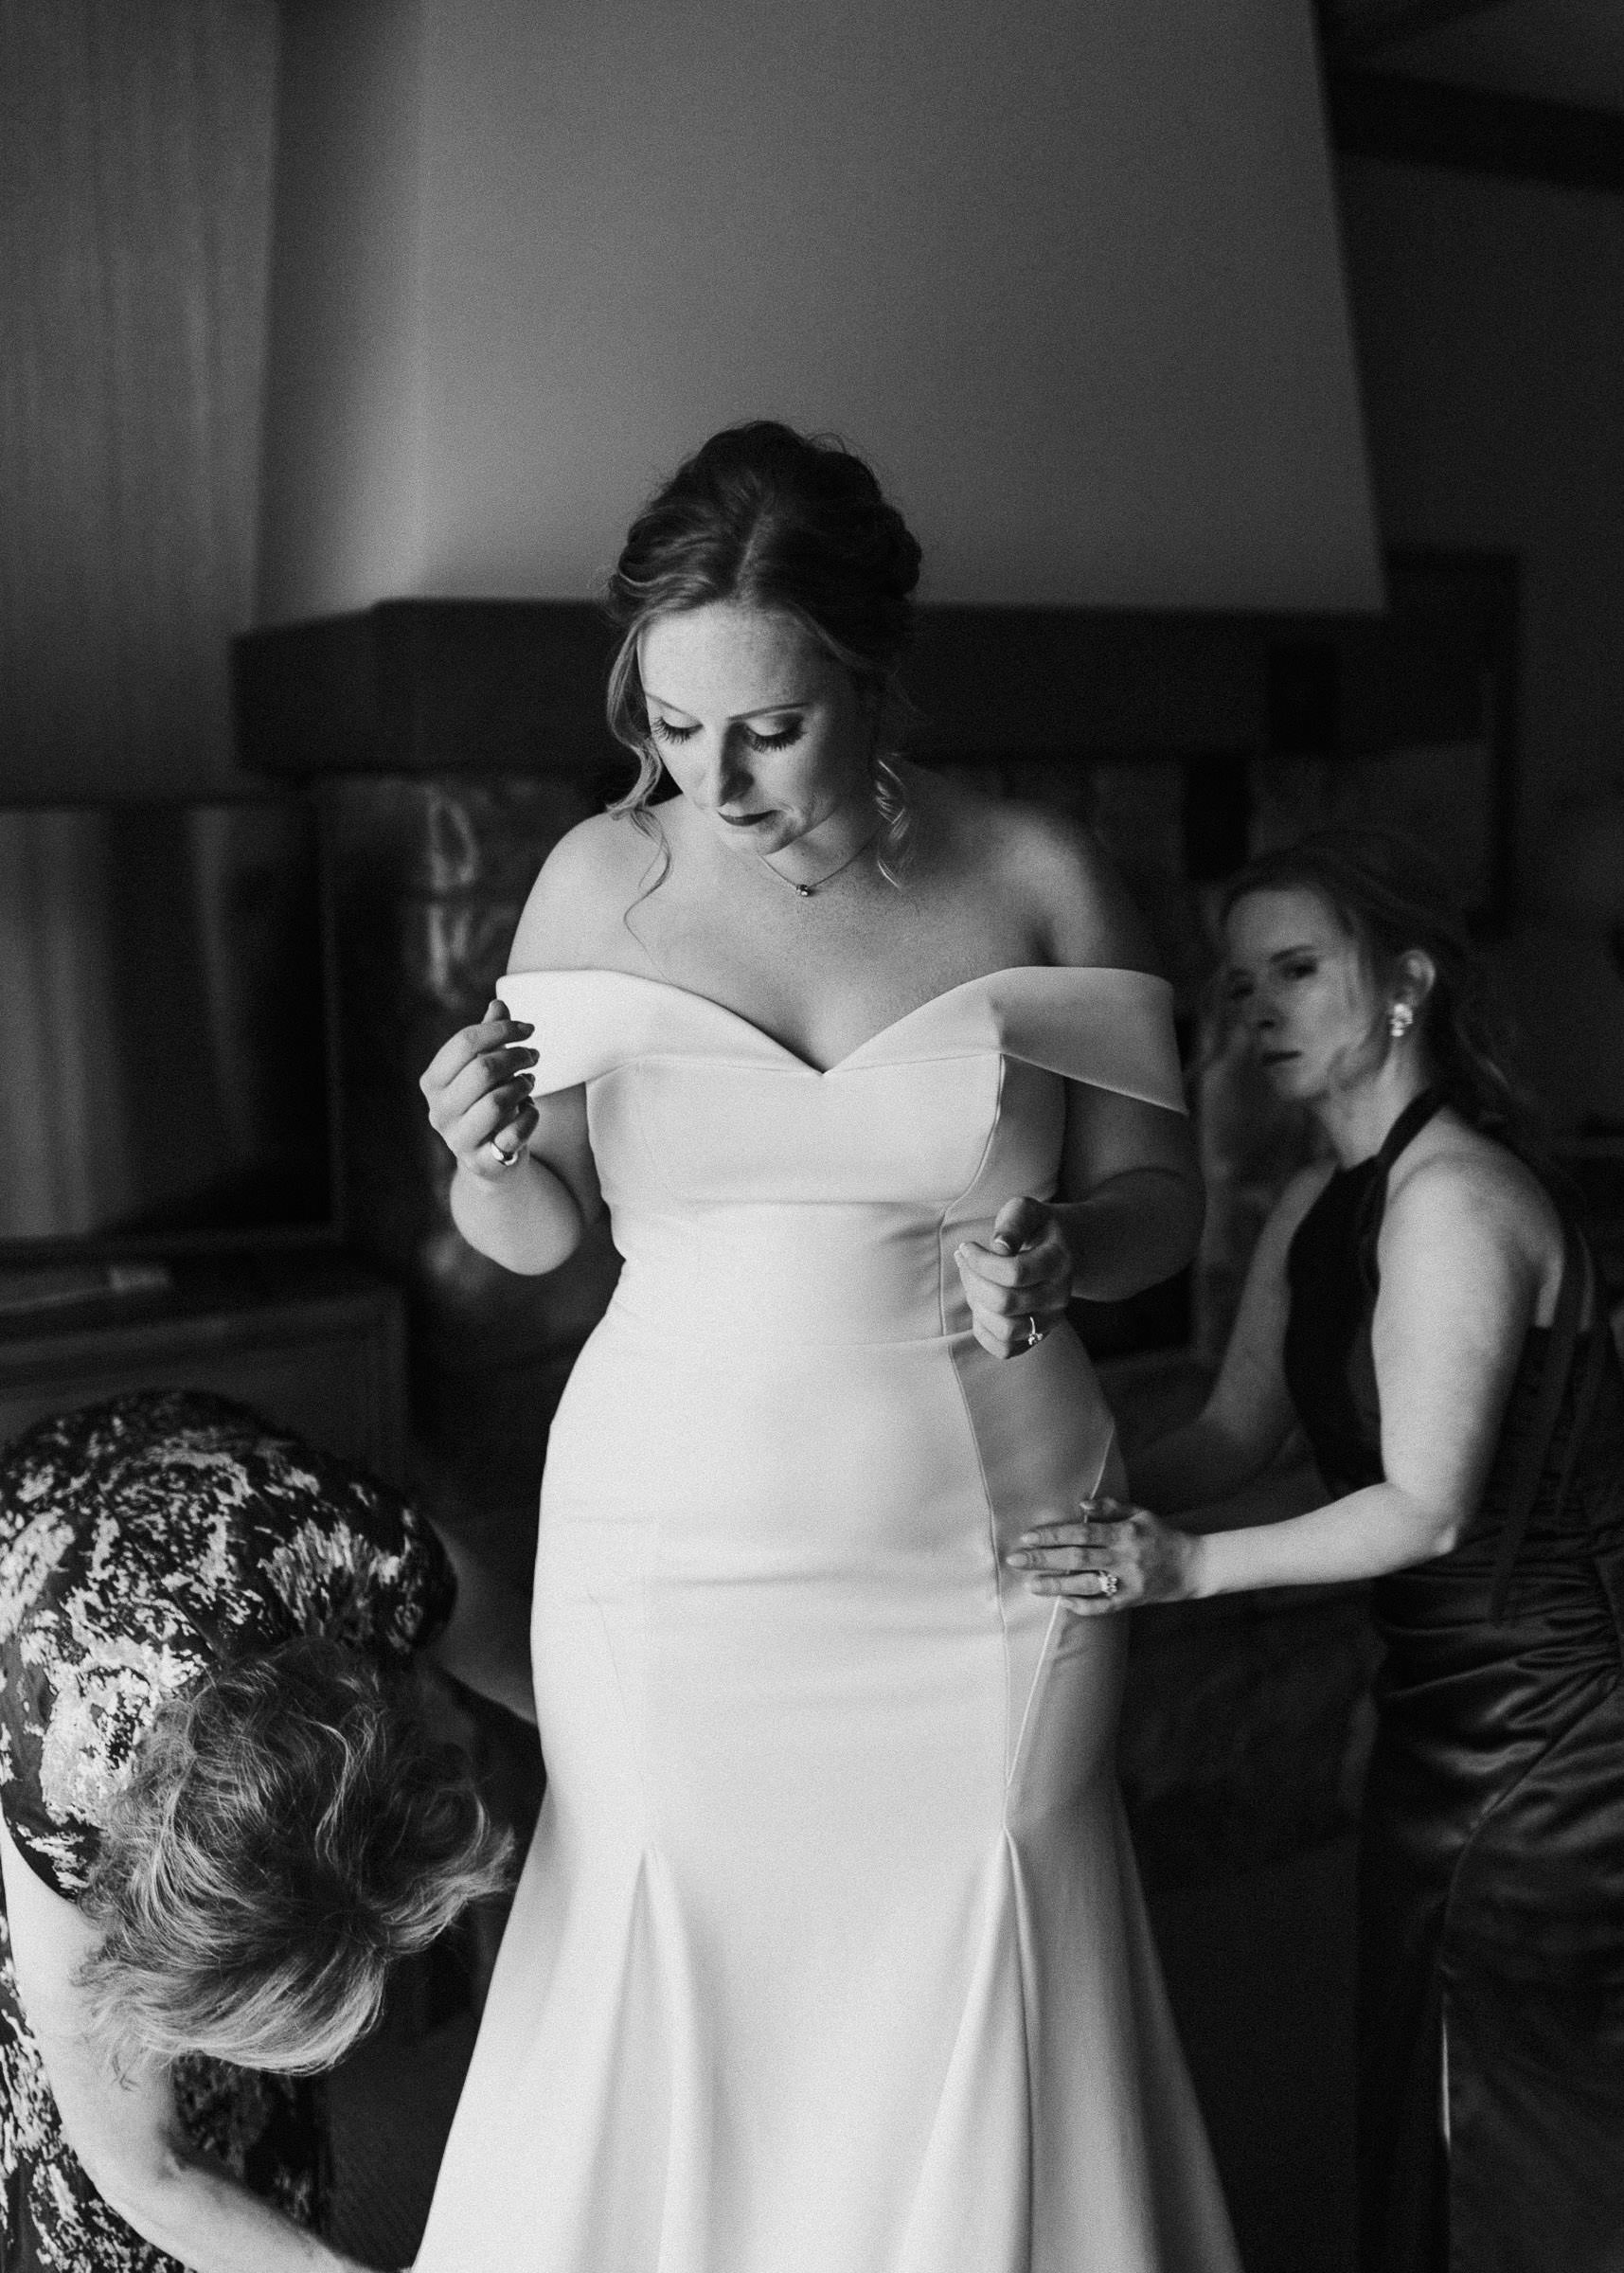 Bride looks on as her mom and sister help get her wedding dress on